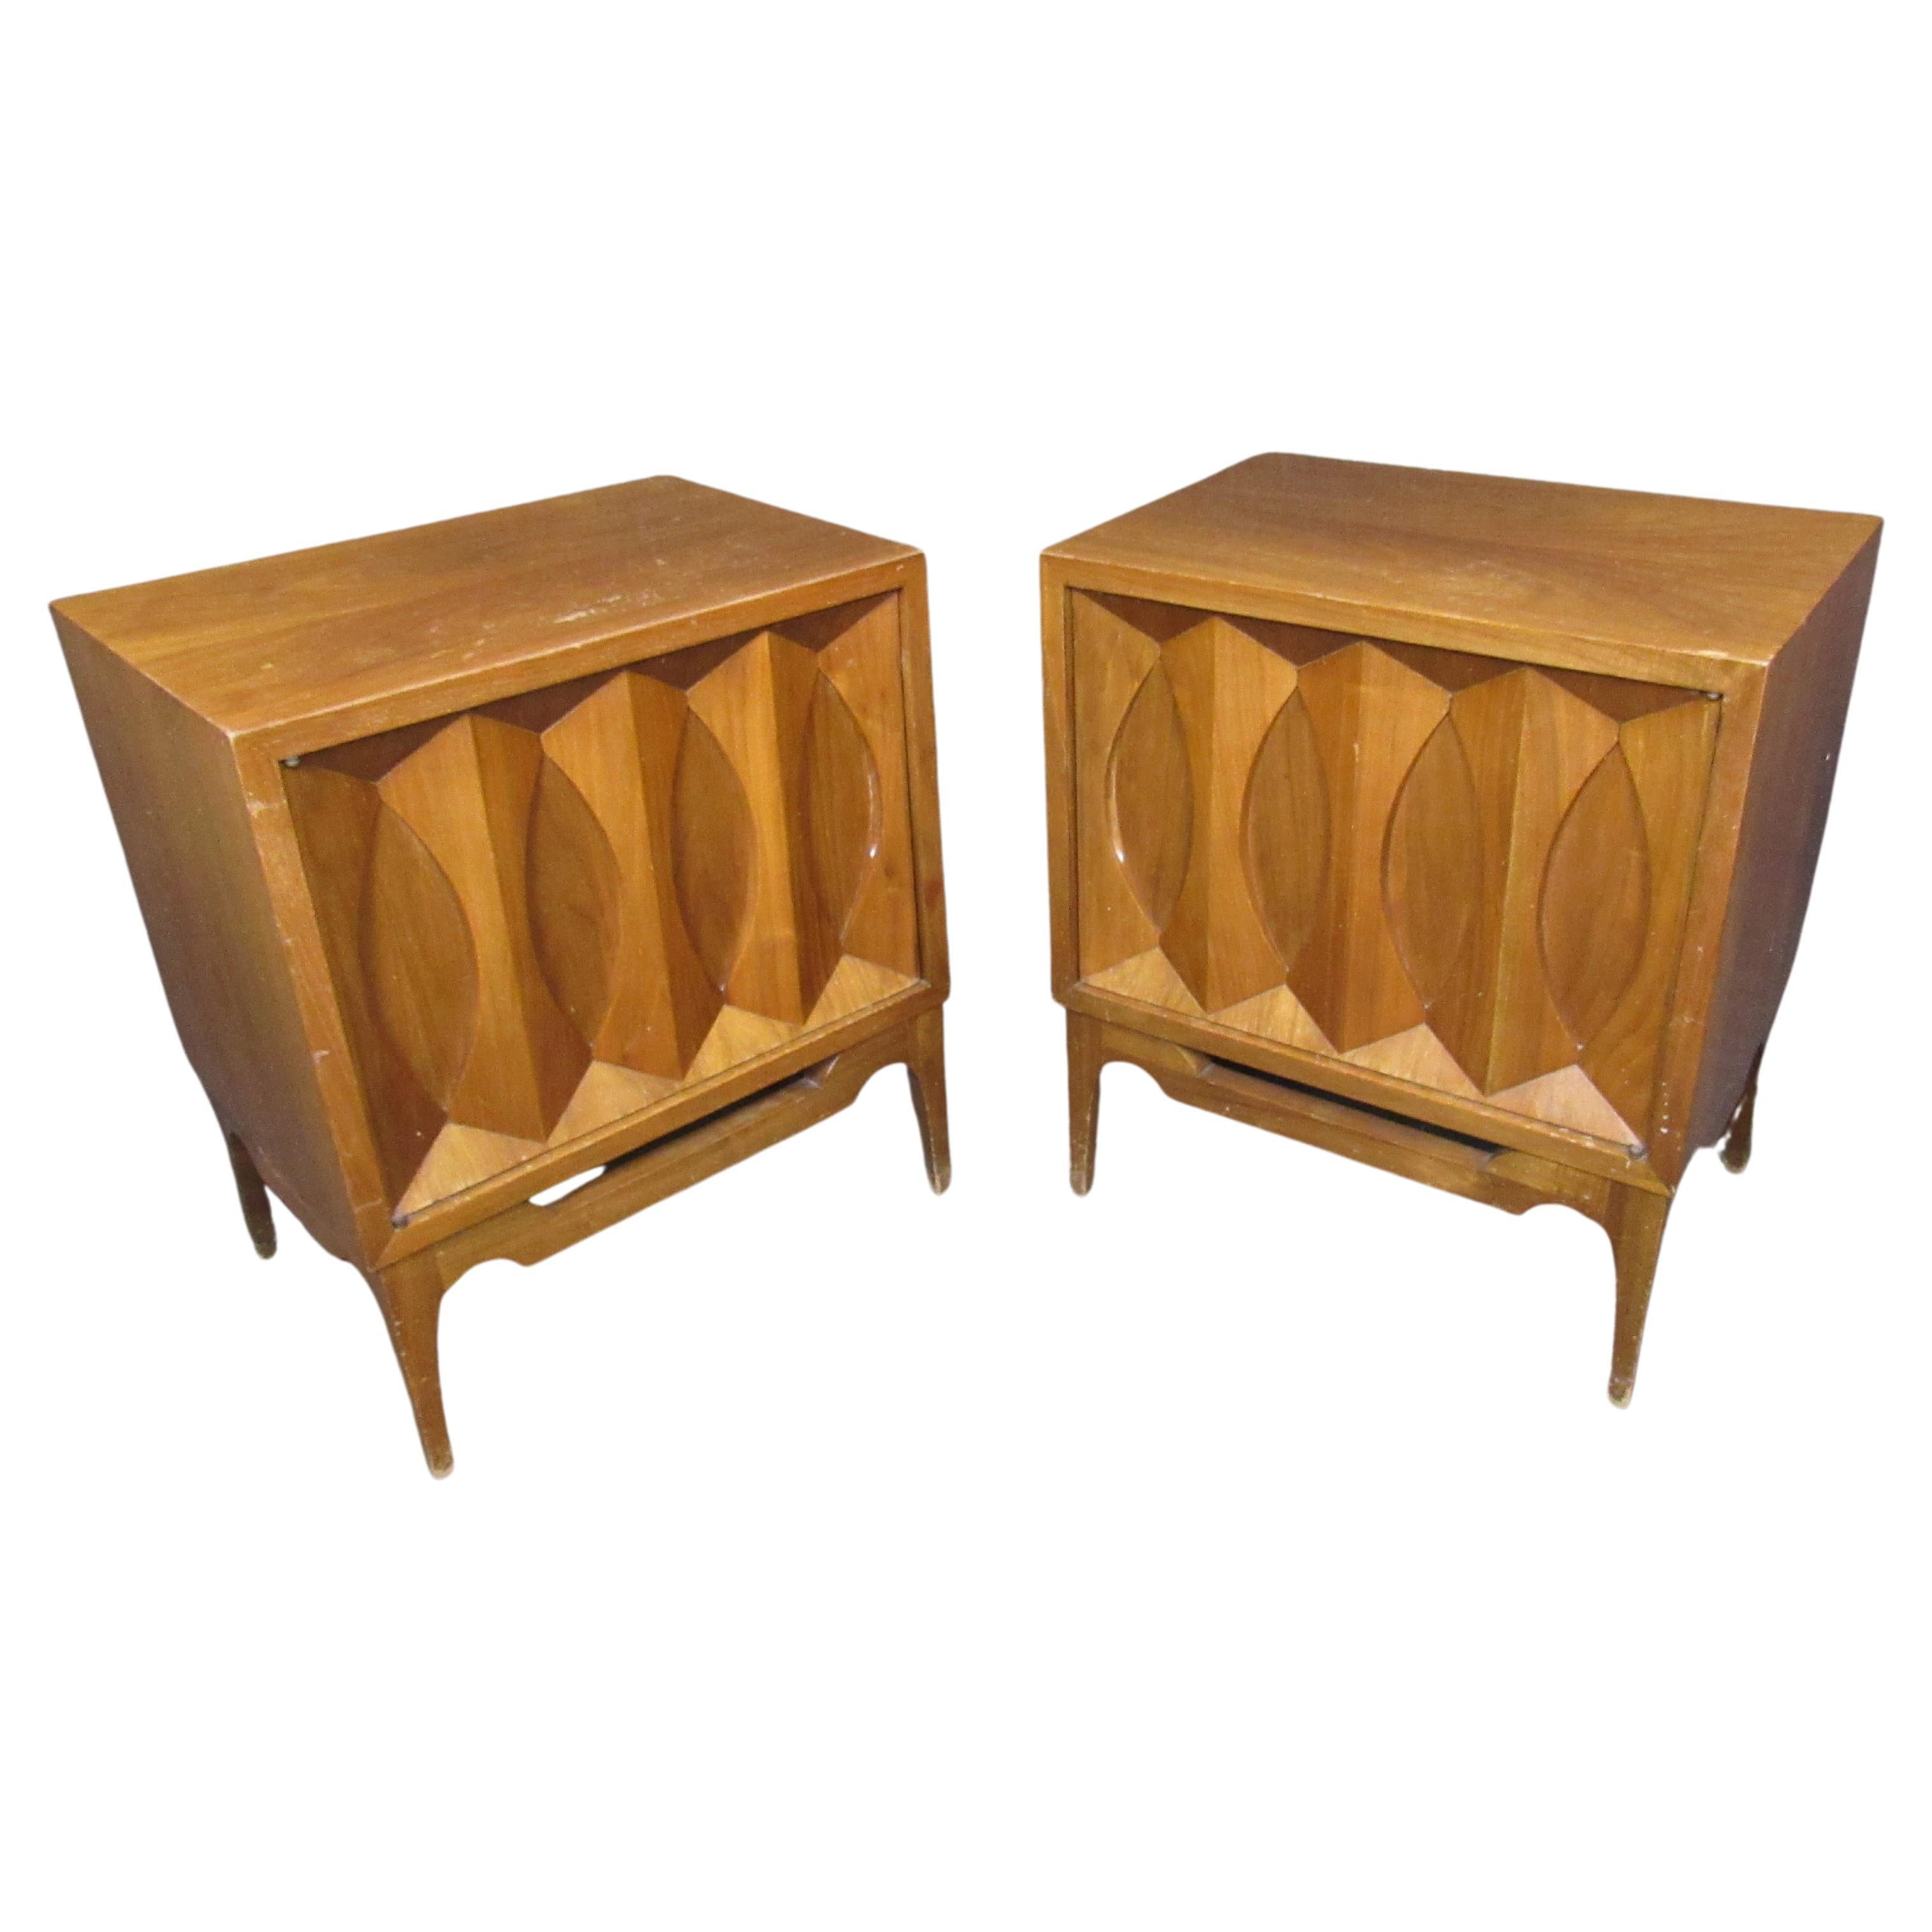 Endlessly interesting vintage Mid-Century Modern walnut night stands with fantastic sculpted details. Each door features a panel of carved bowties reminiscent of the Classic Broyhill Brasilia and Kent Coffey Perspecta lines of the 1950s and 1960s. A